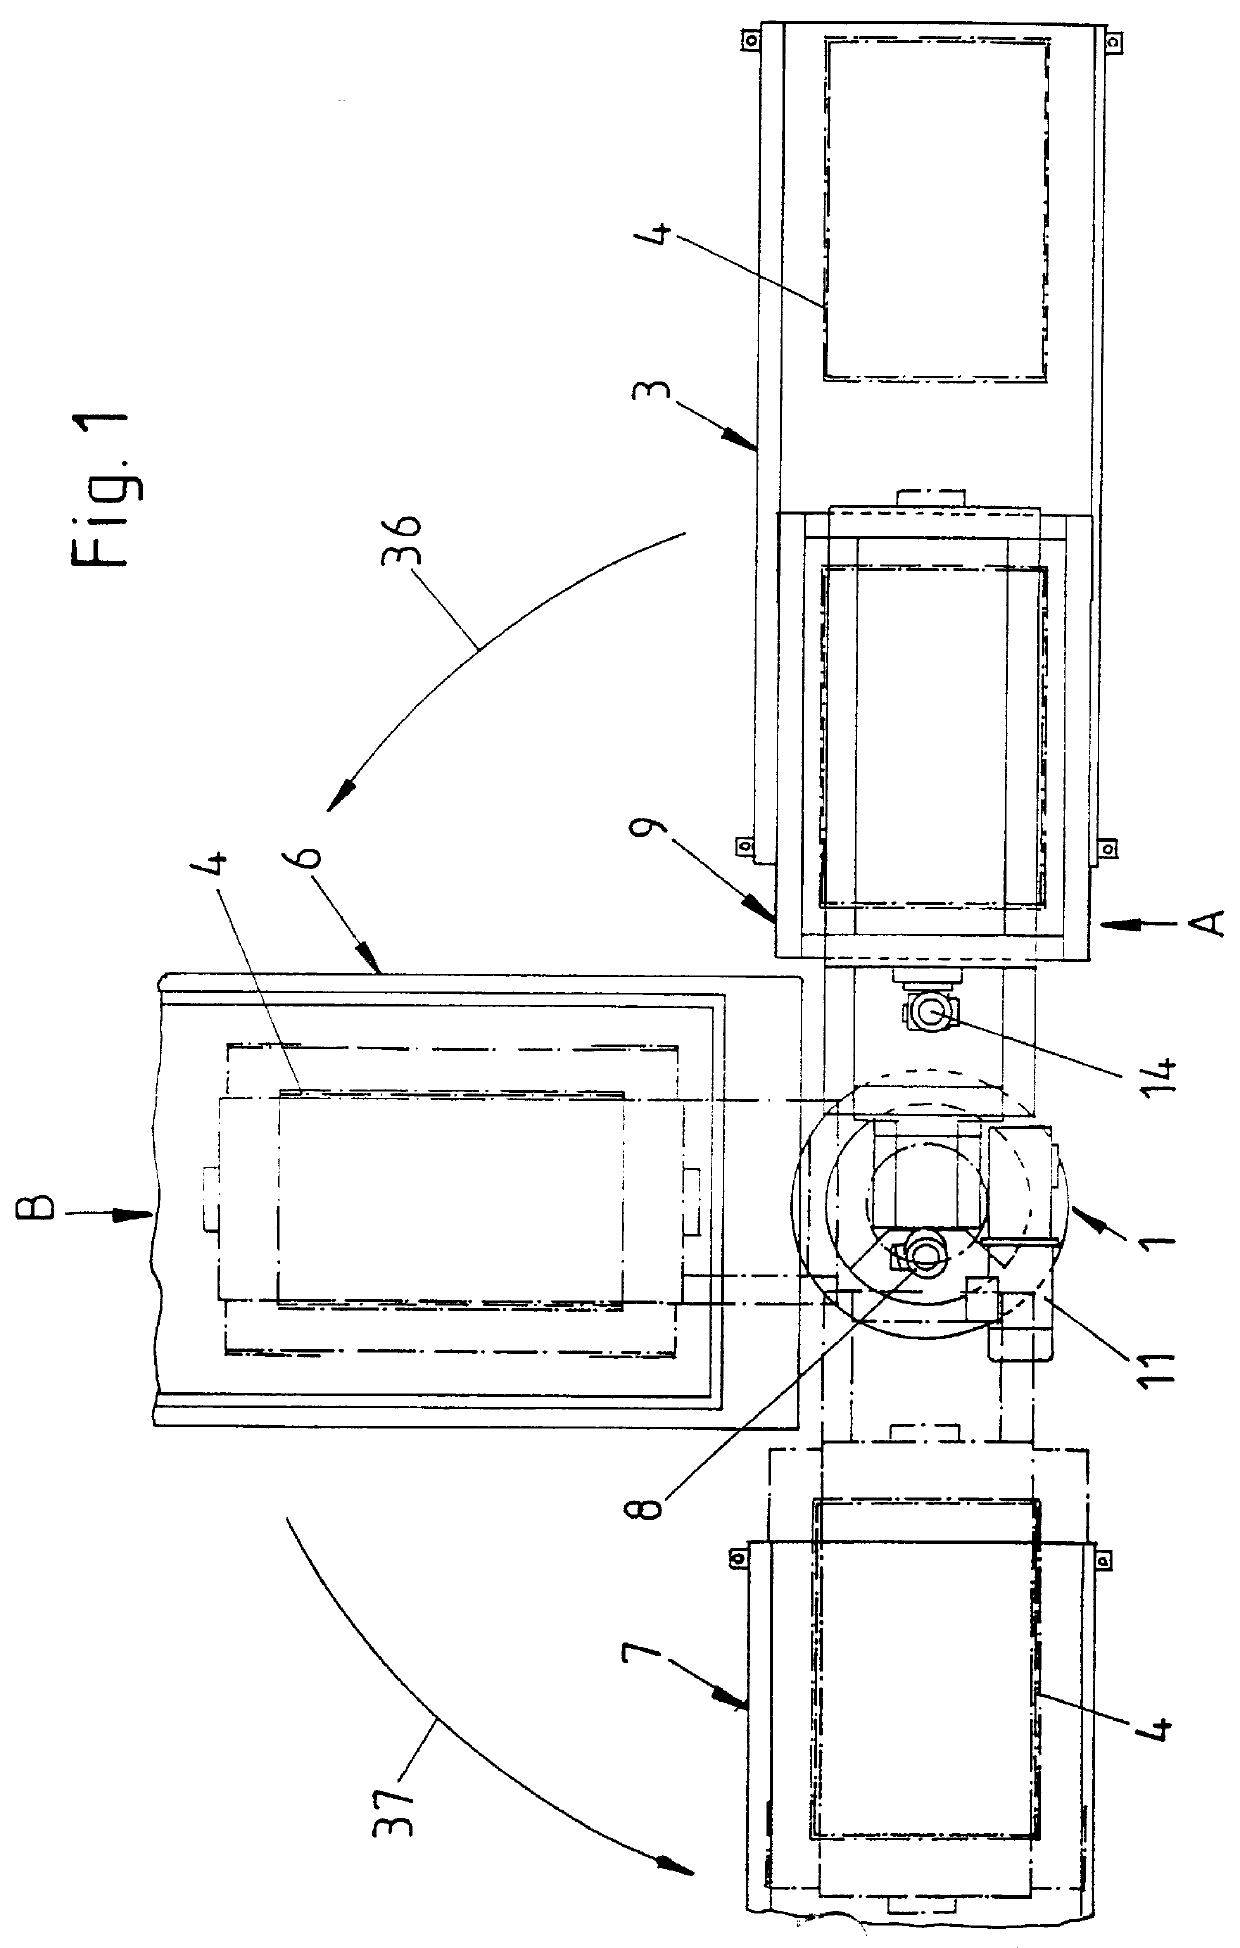 Method of and apparatus for emptying containers for flowable materials such as comminuted tobacco leaves